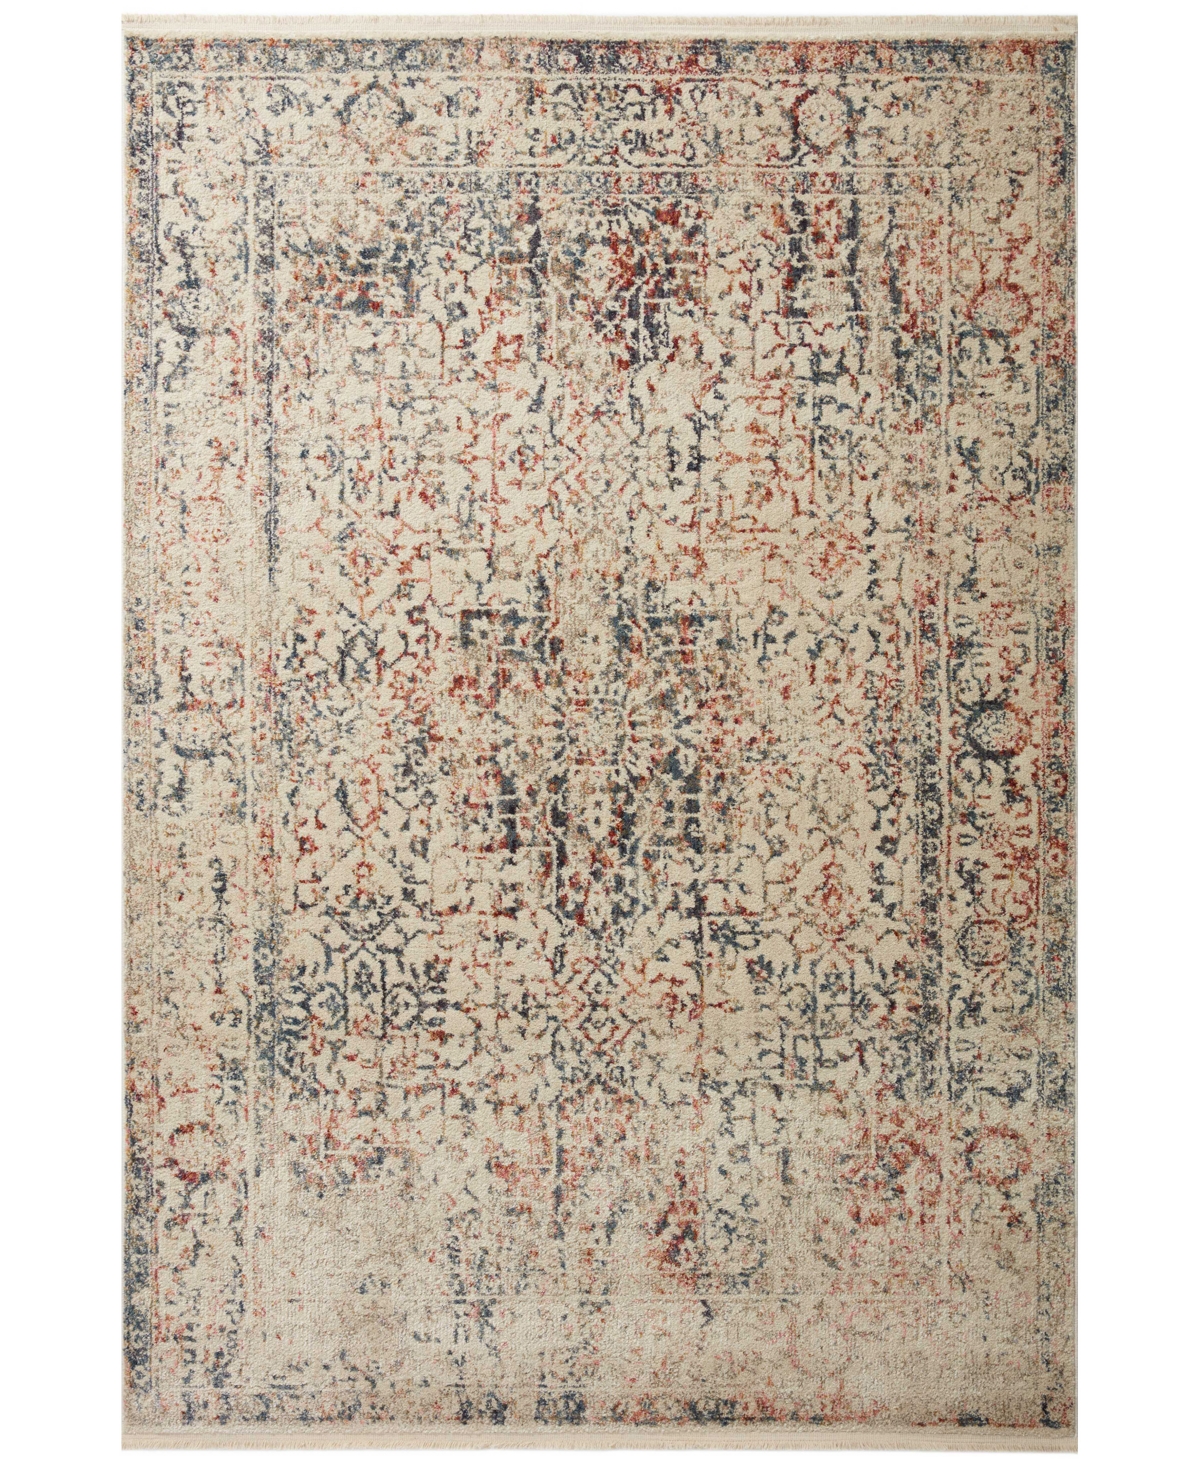 Magnolia Home By Joanna Gaines X Loloi Janey Jay-04 7'10" X 10'10" Area Rug In Ivory